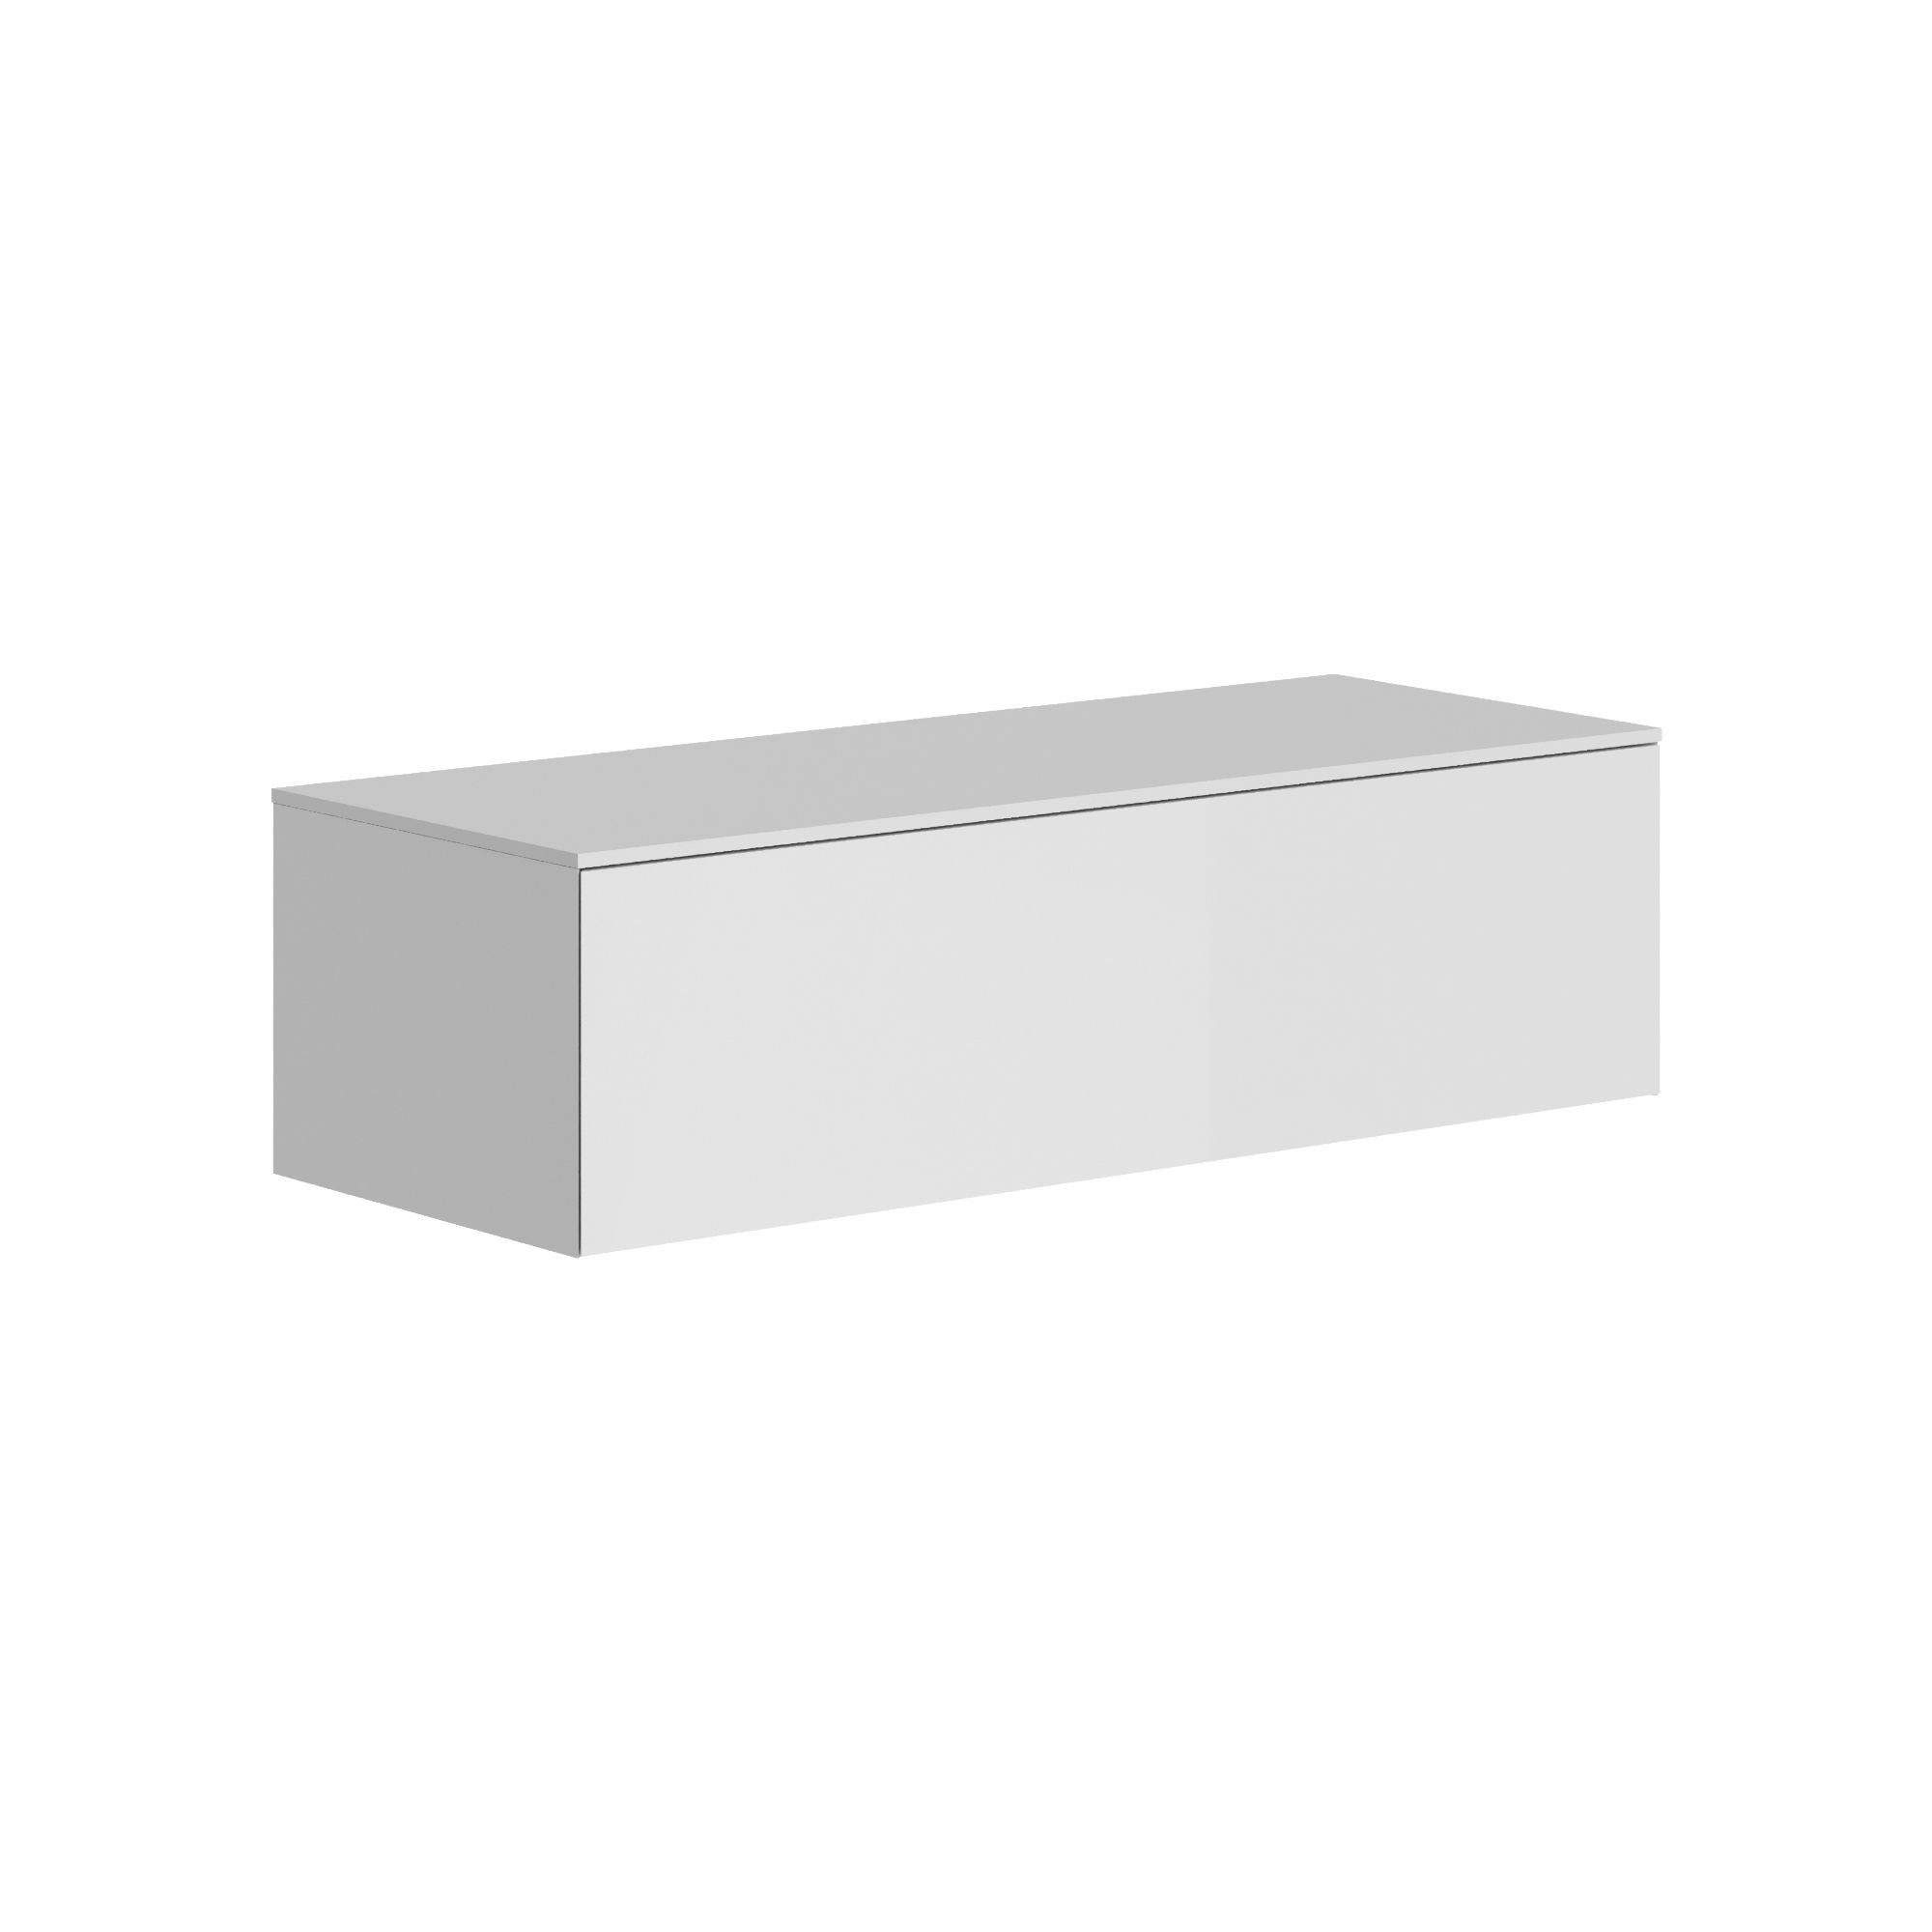 The Ellery Washbasin Push Open Unit 1200x320mm with Solid Surface Countertop